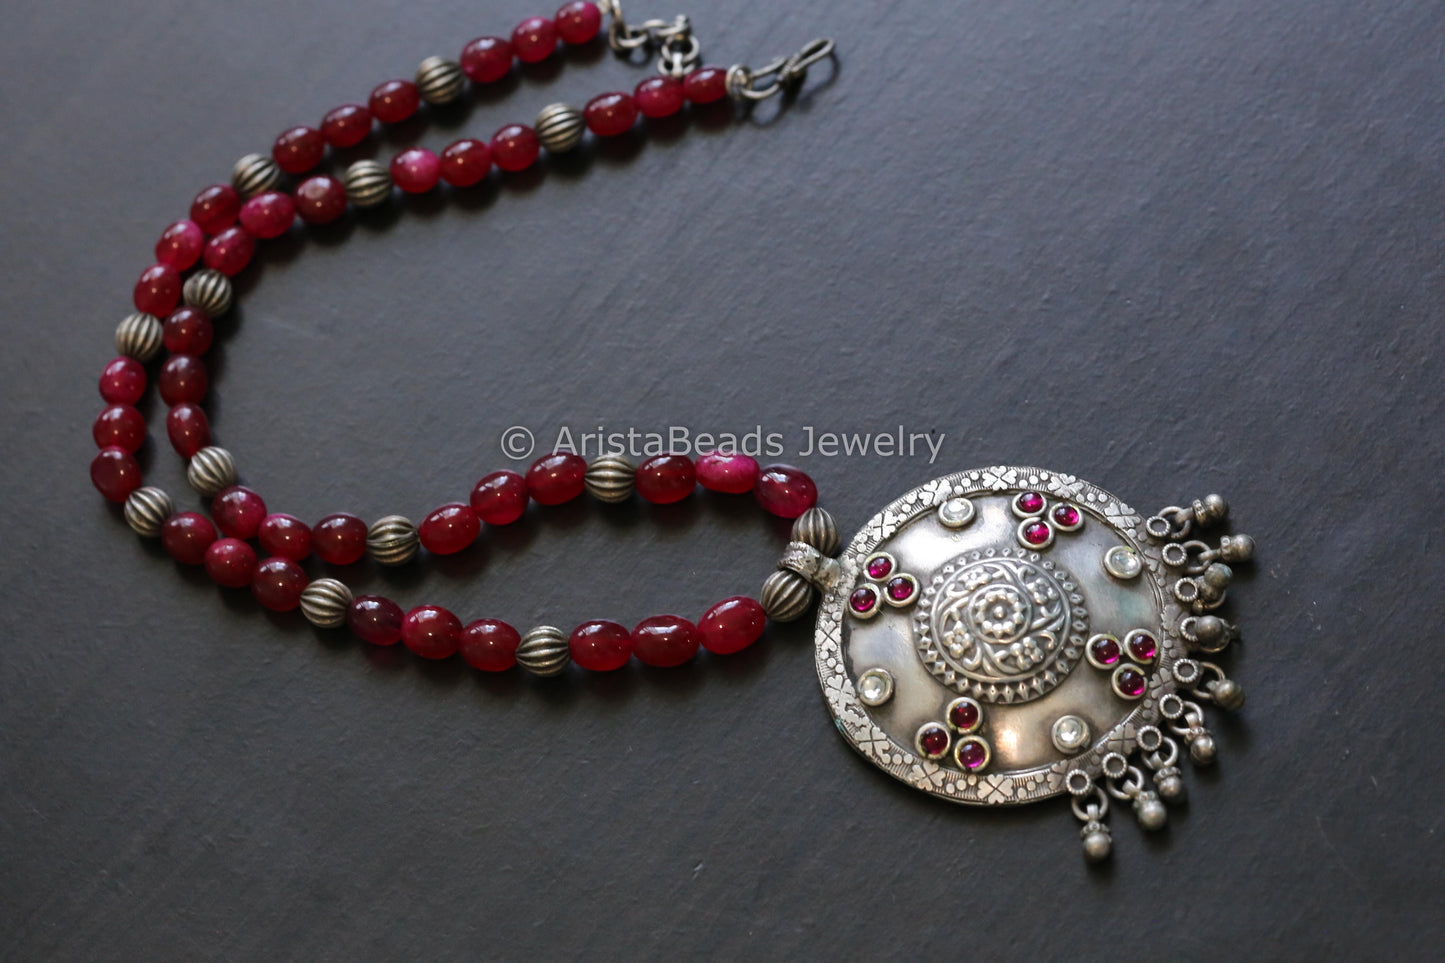 Handmade Silver Look Beaded Necklace - Style 2